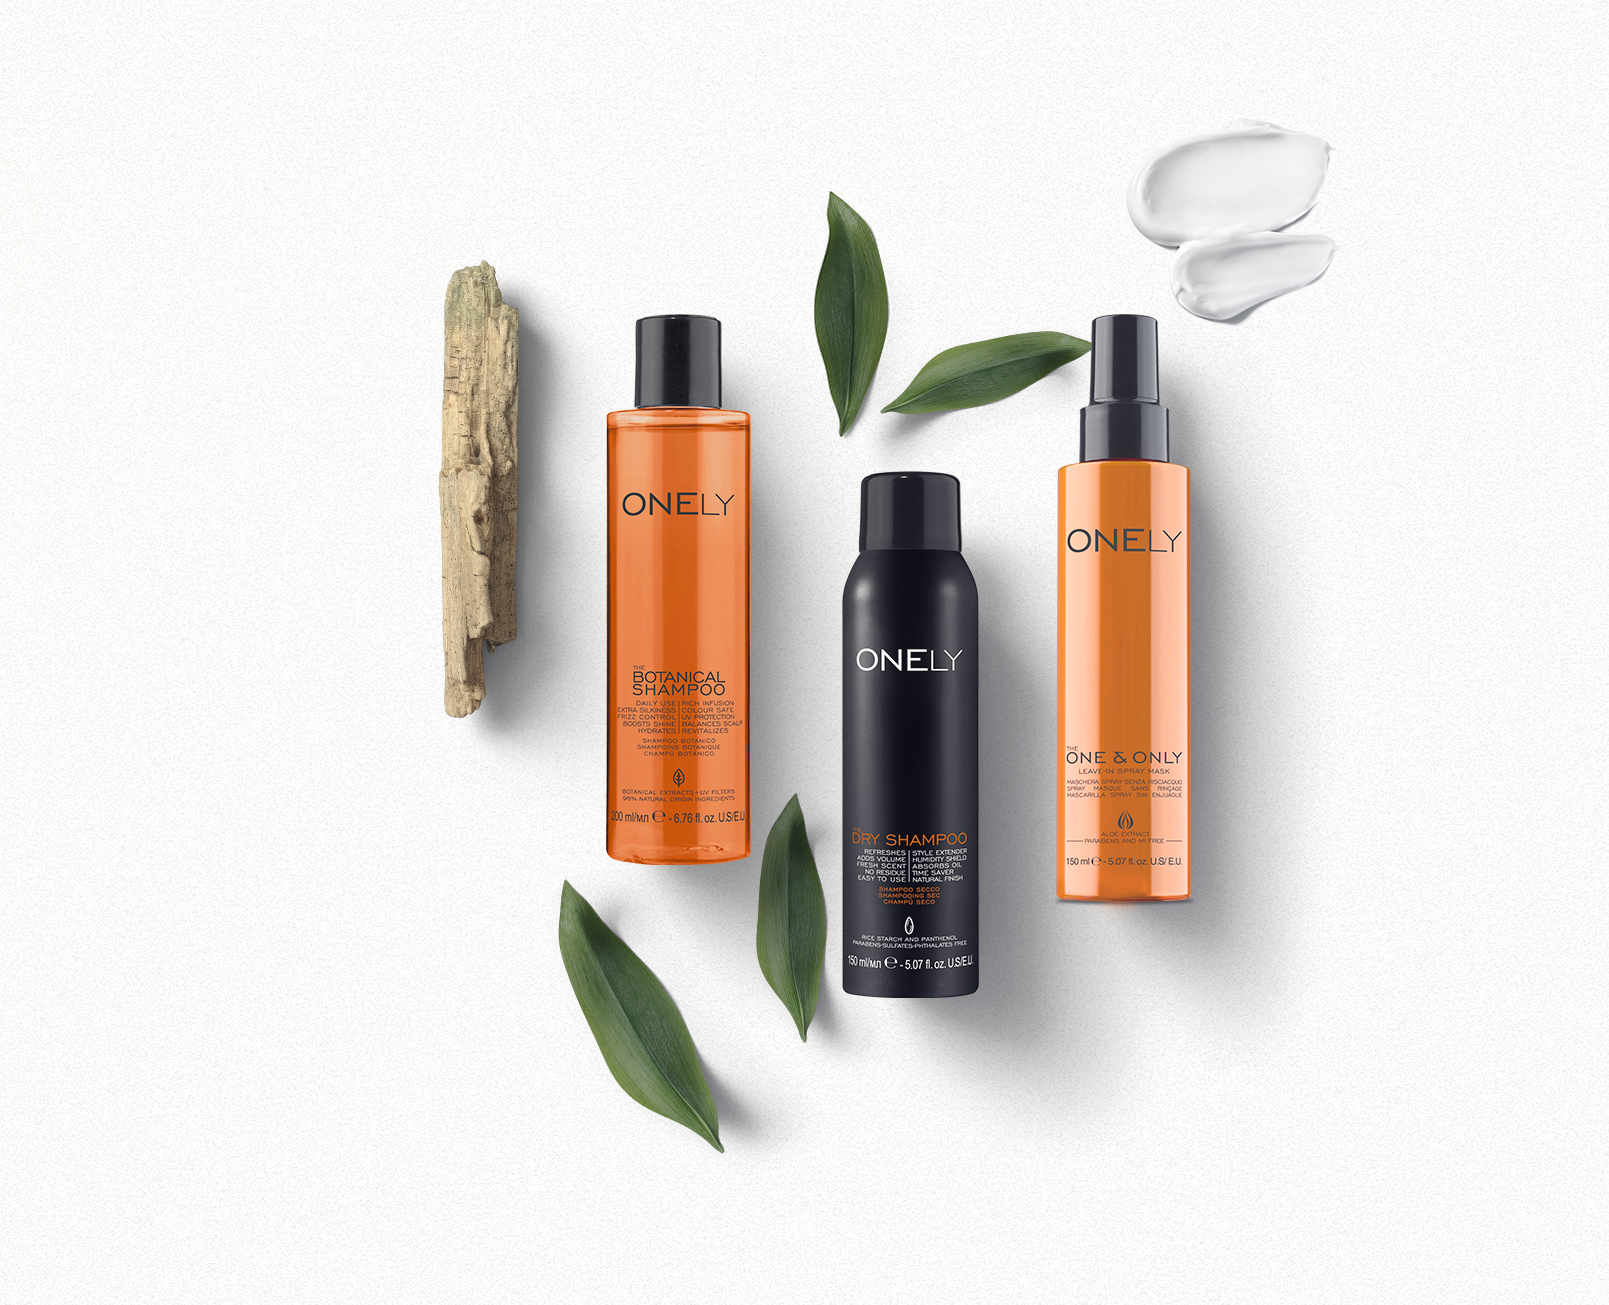 ONELY Botanical Haircare